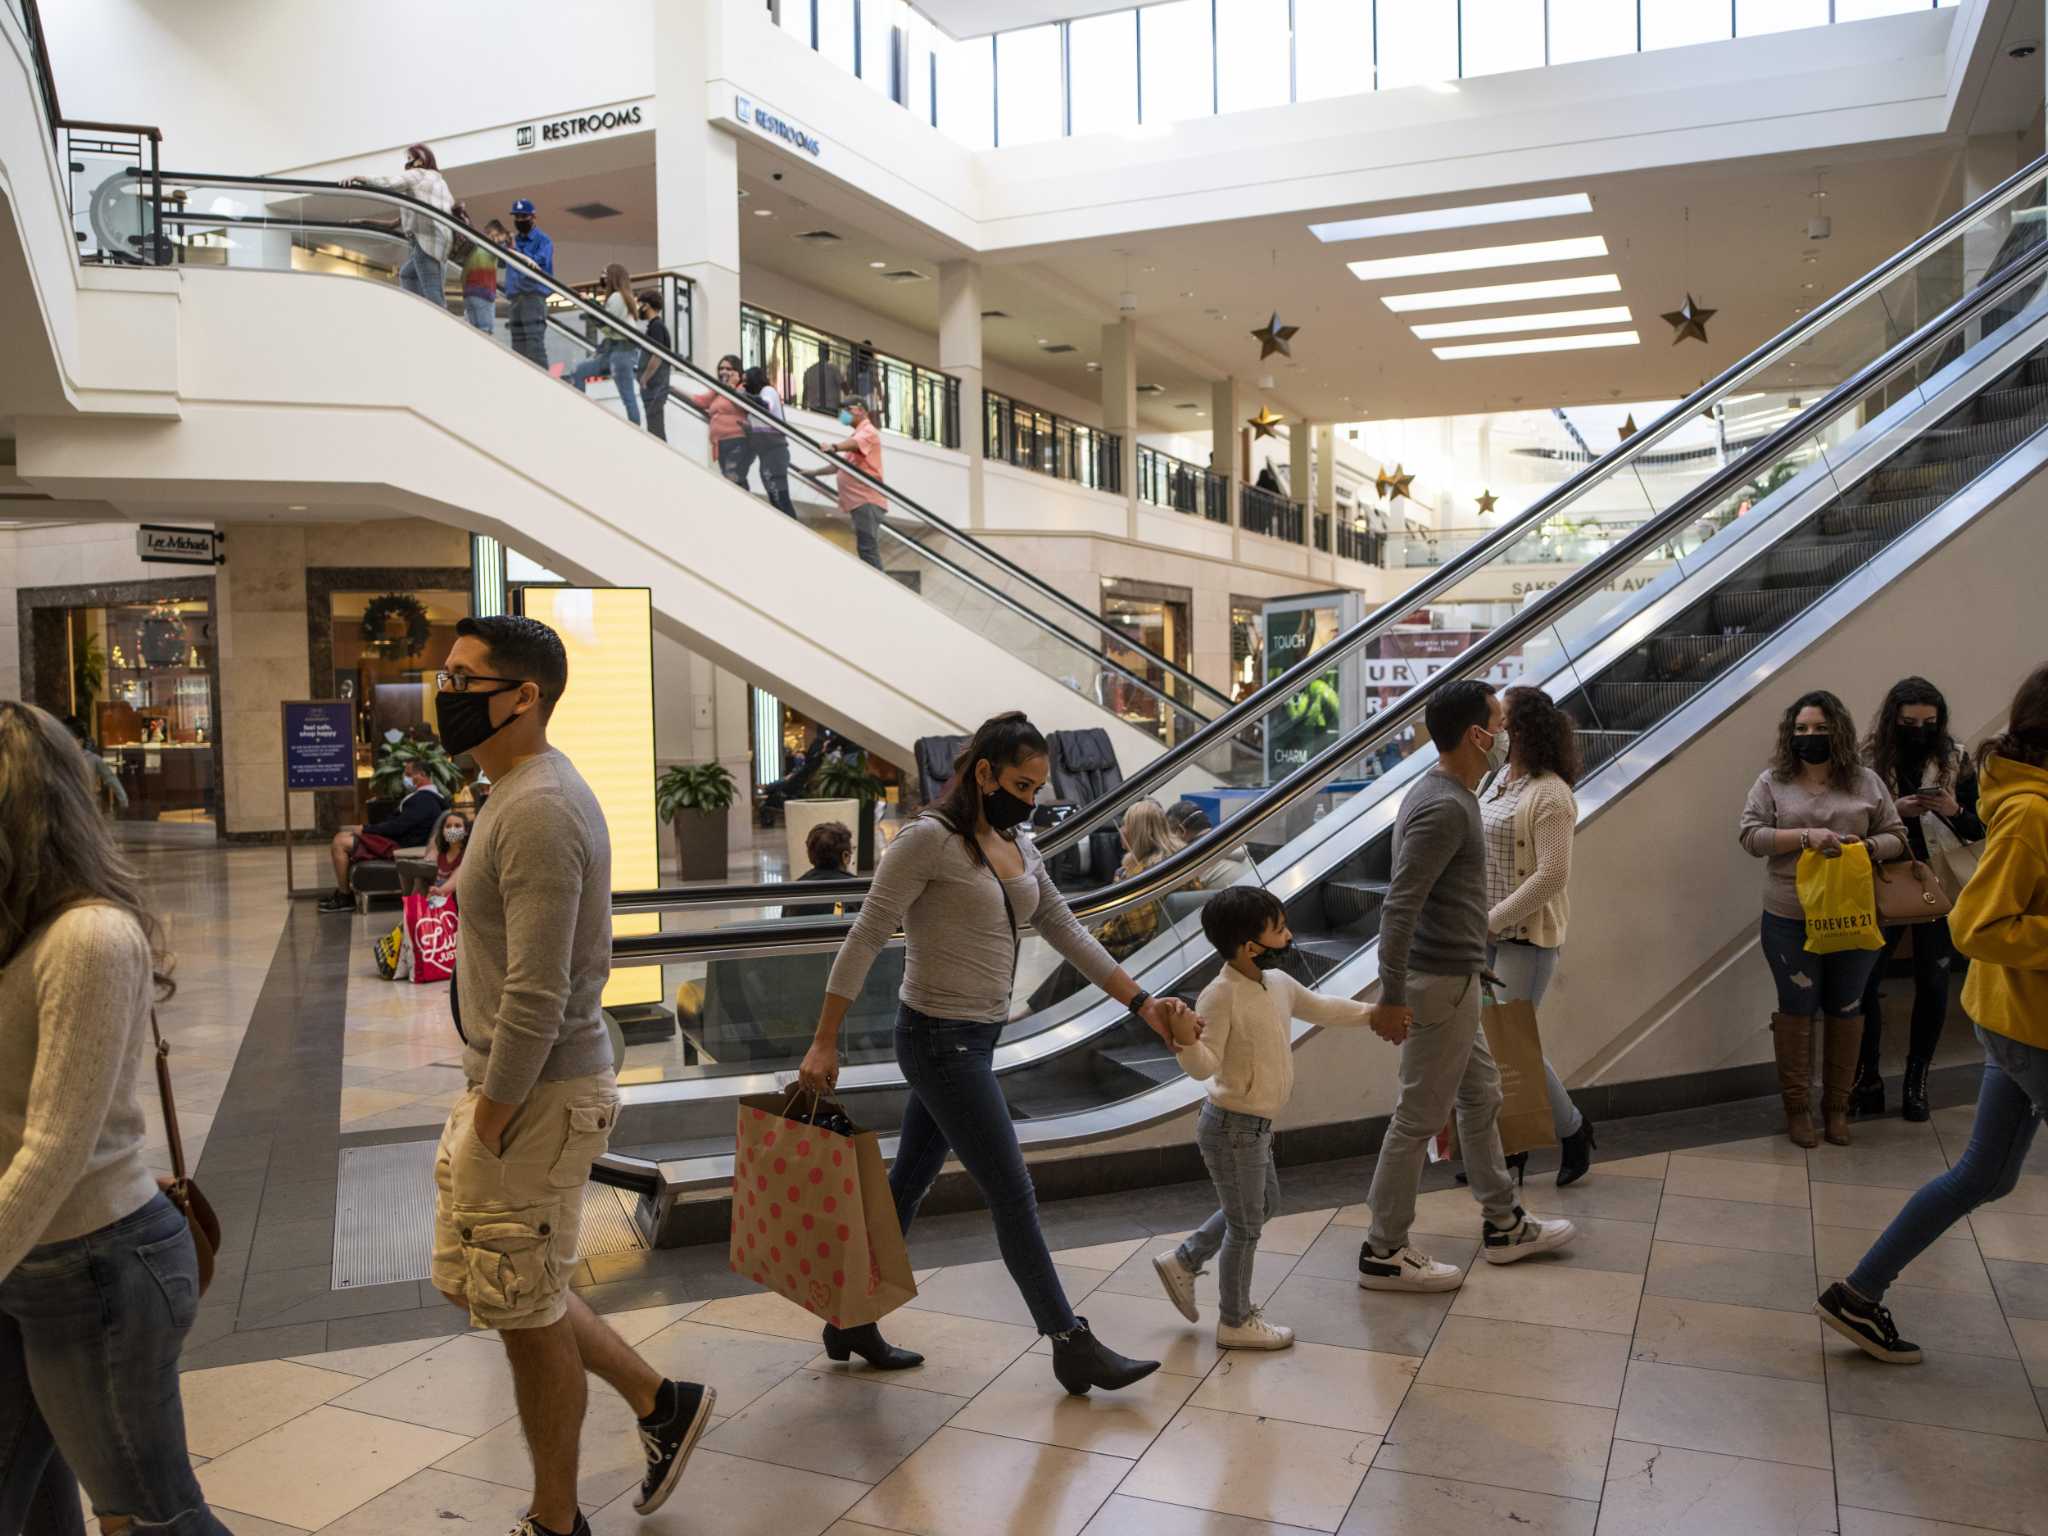 8 Best Shopping Malls in San Antonio - Where to Shop in San